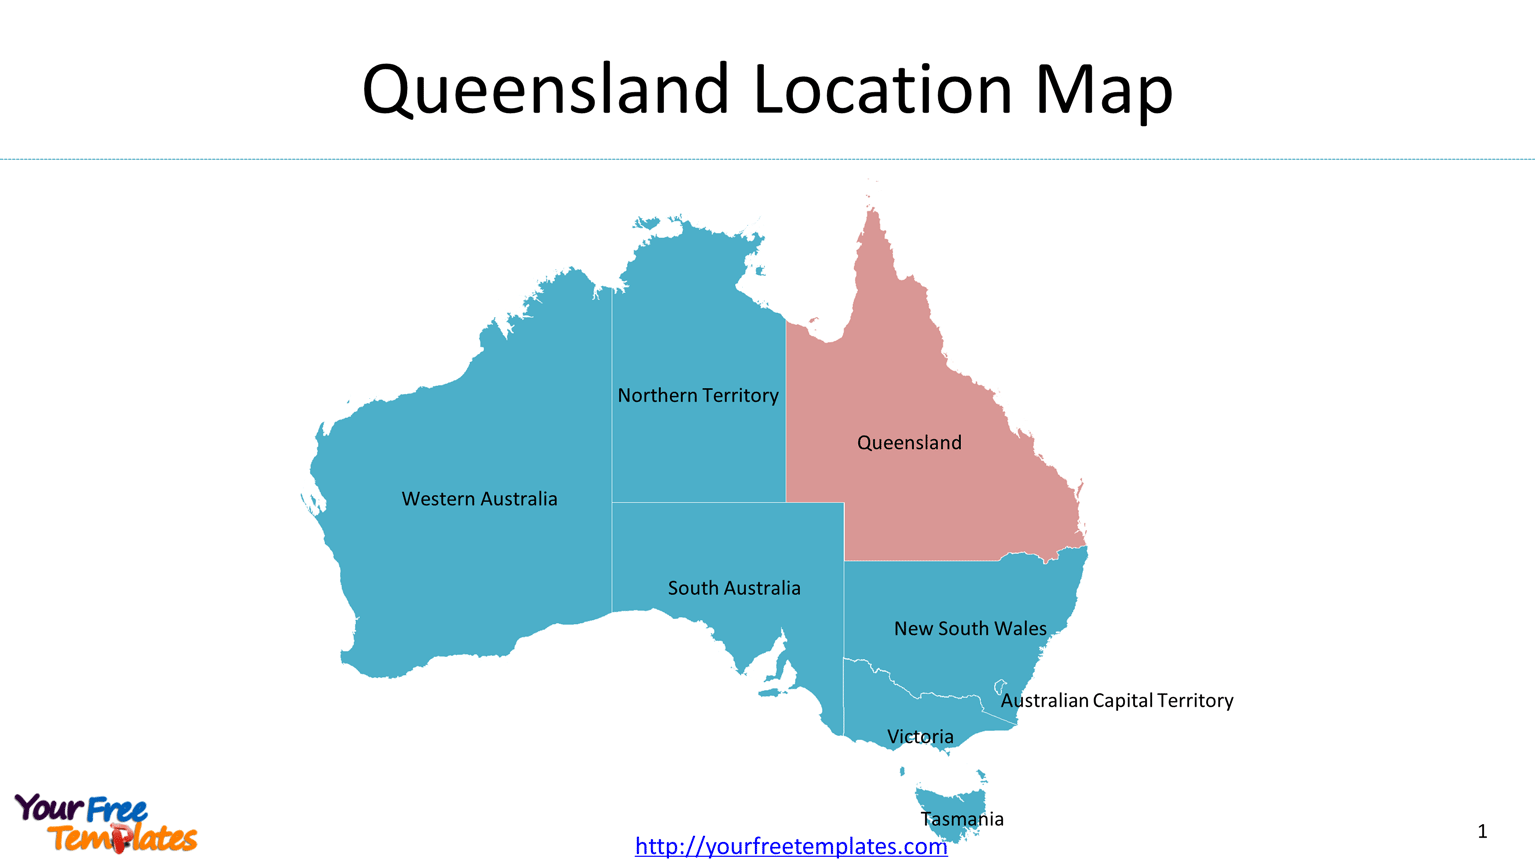 Map of Queensland for state and greater Brisbane outline, Map of Queensland with populated cities.